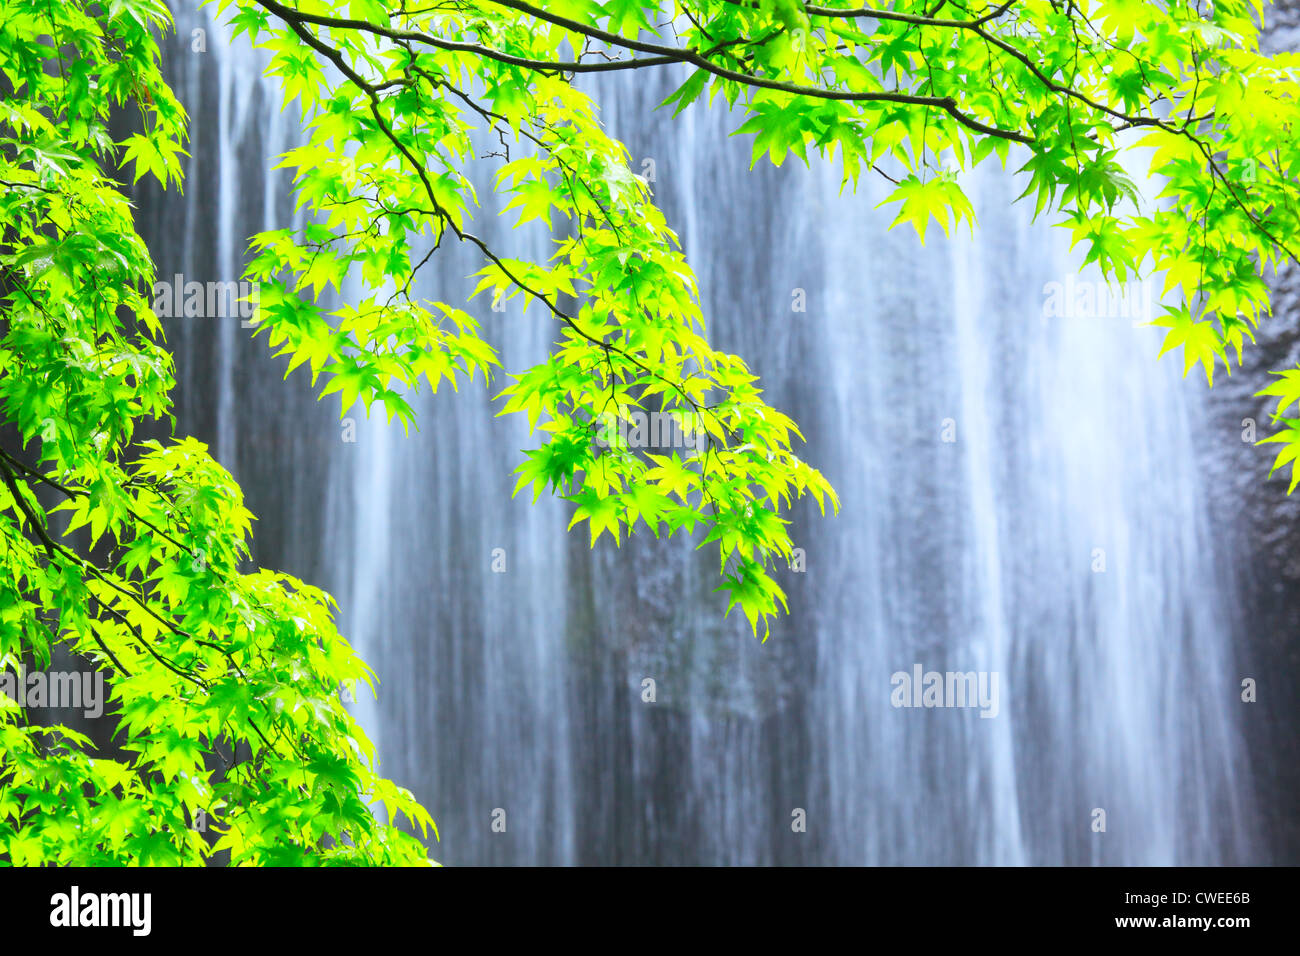 Shiny Green Leaves And Waterfall In Background Stock Photo